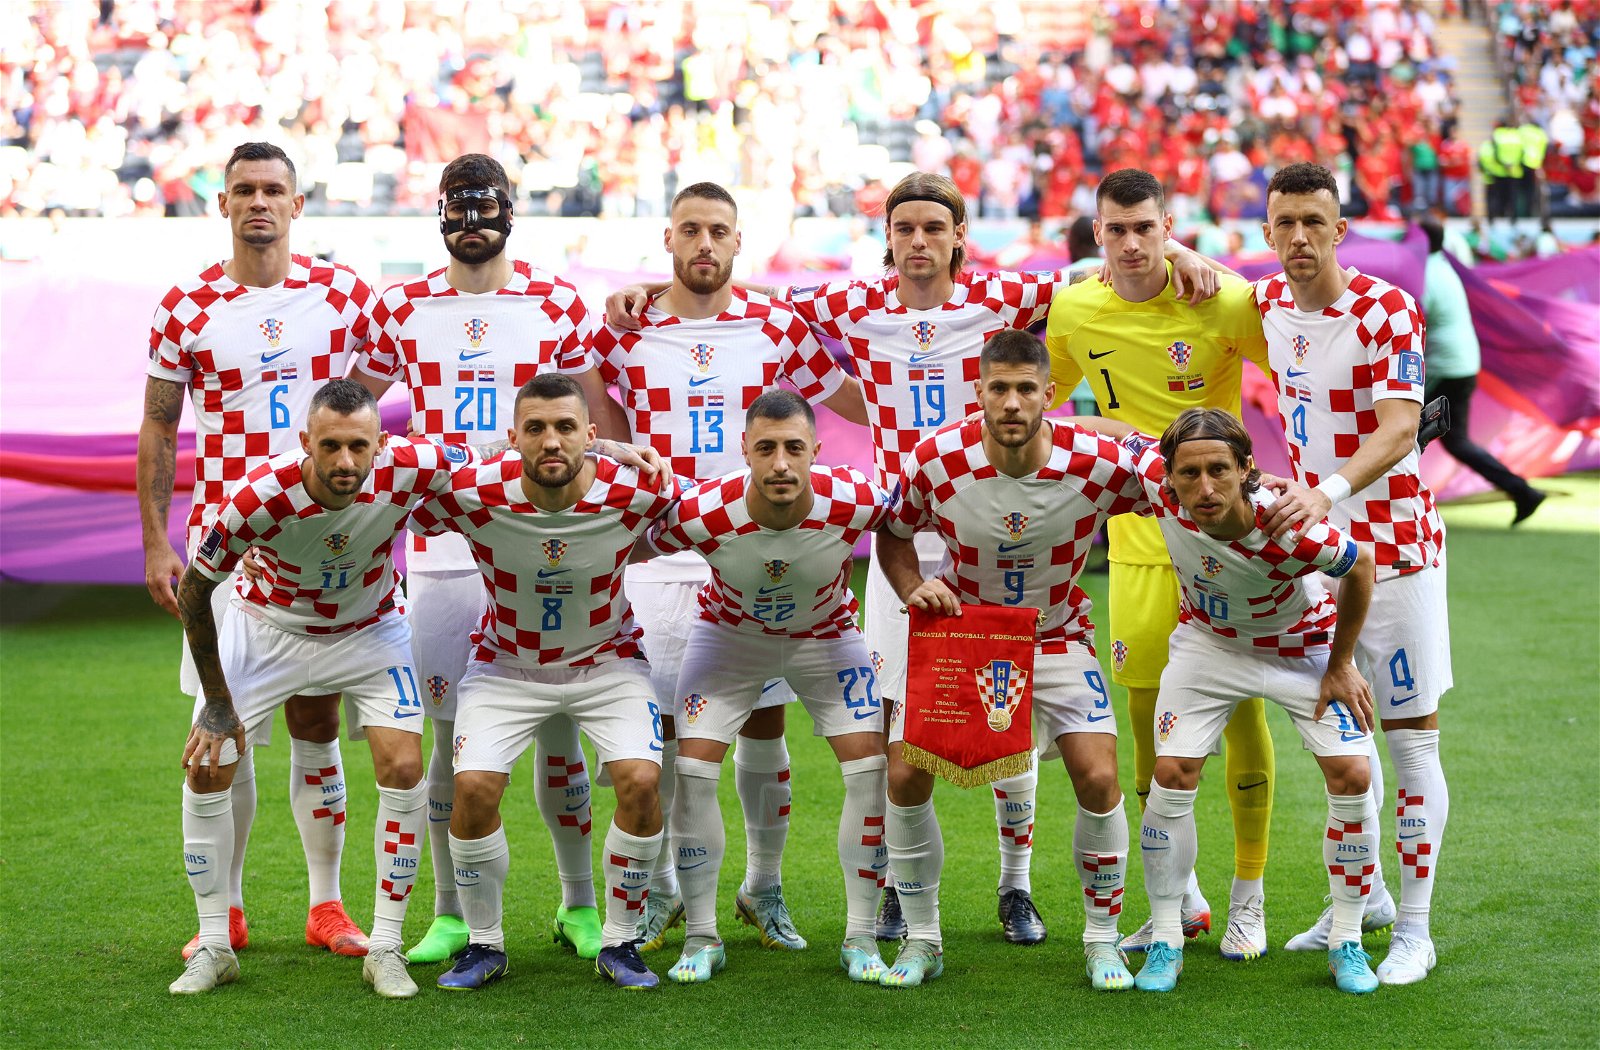 Argentina vs Croatia World Cup Live Streaming? How To Watch Argentina vs Croatia World Cup Game Live Online!